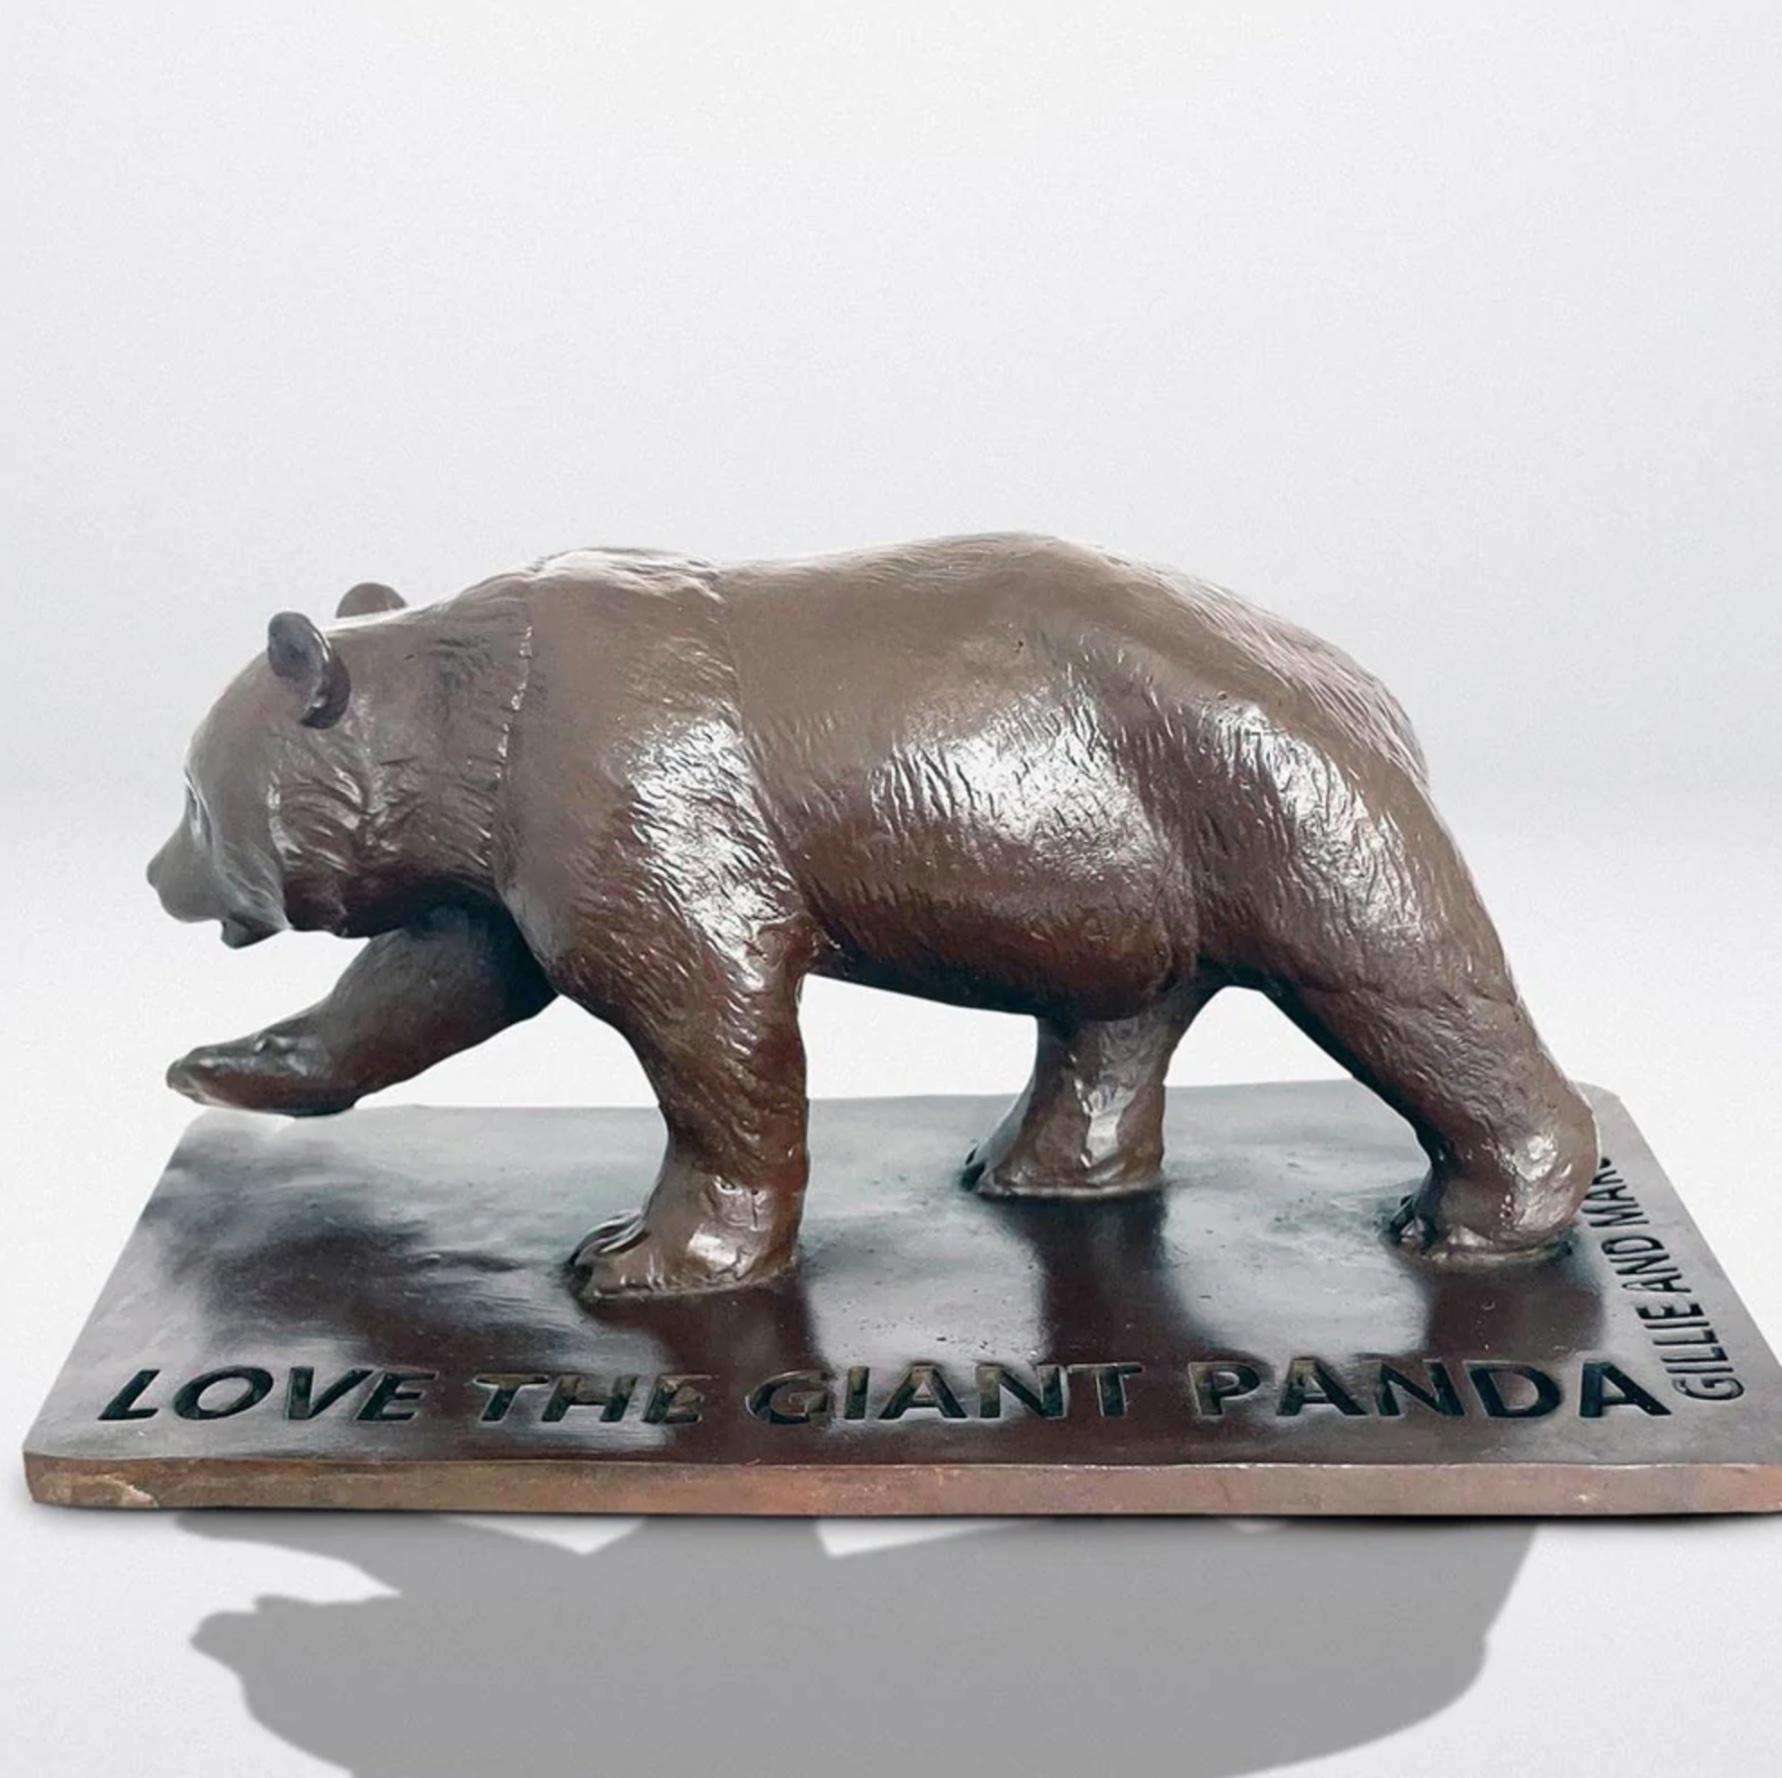 Title: Love the Giant Panda (Bronze Sculpture)
Authentic Bronze Sculpture

Description:
This authentic bronze sculpture titled 'Love the Giant Panda' by artists Gillie and Marc has been meticulously crafted in bronze. It features a giant panda